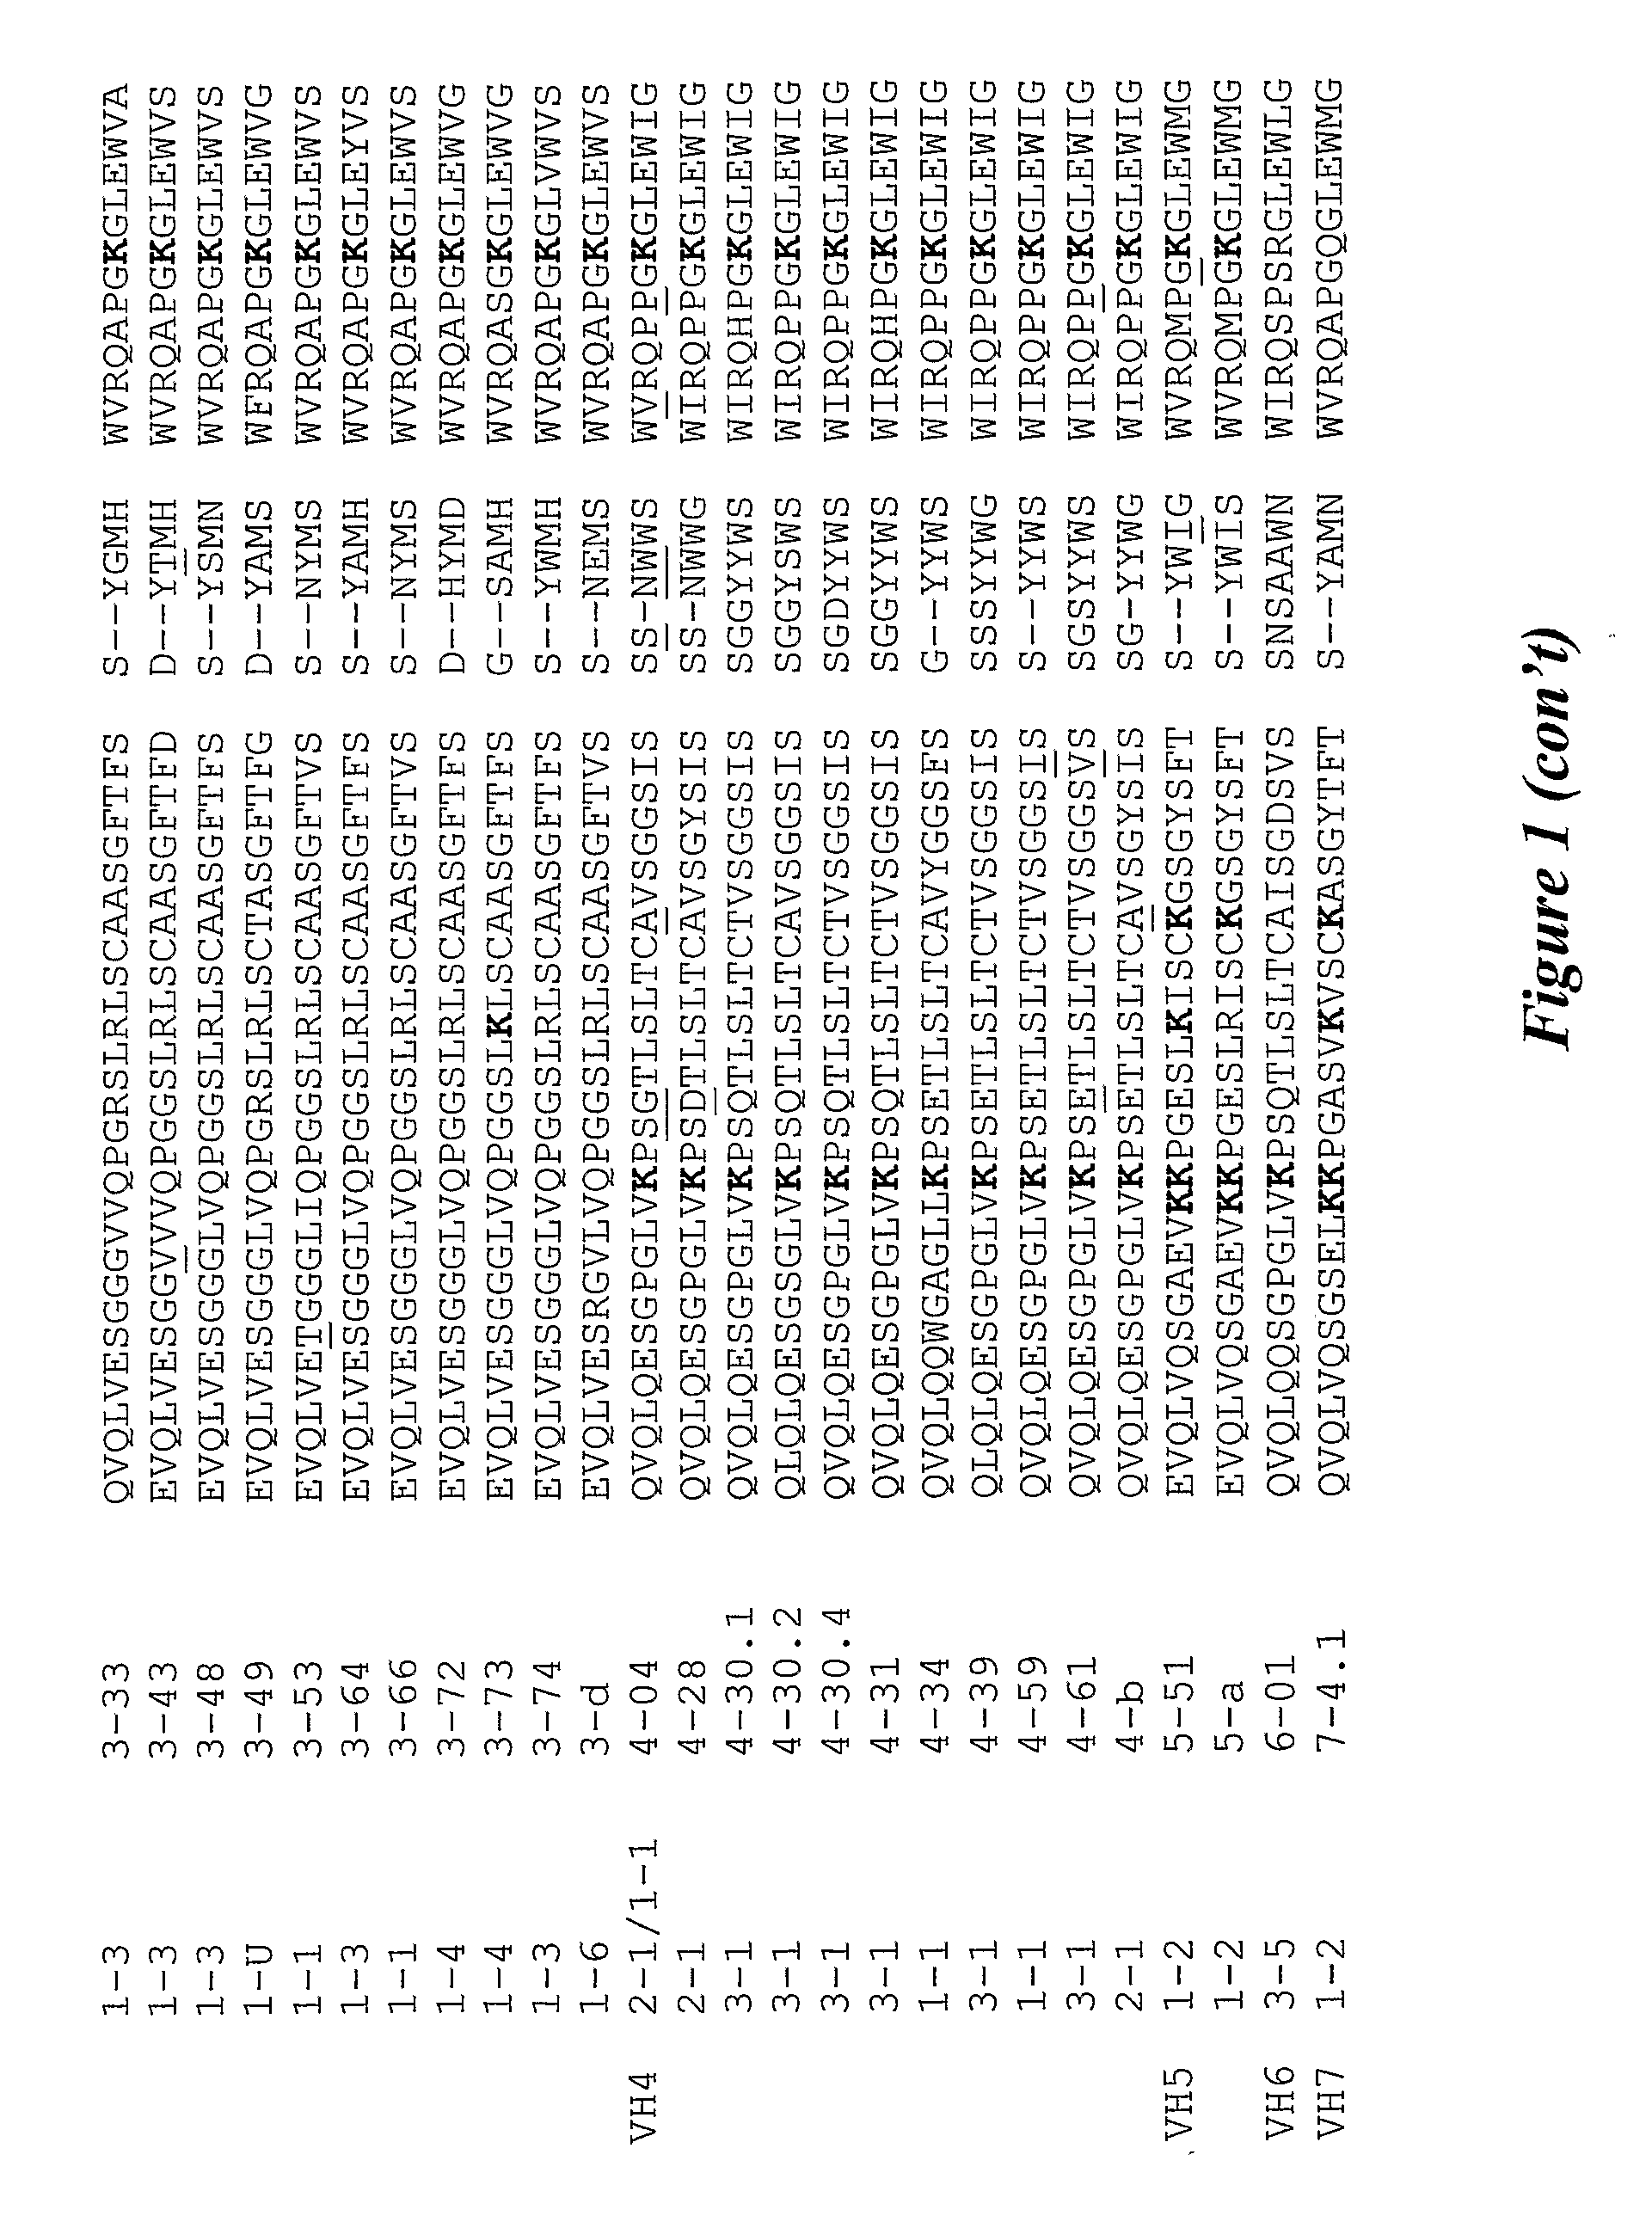 Biological materials and uses thereof